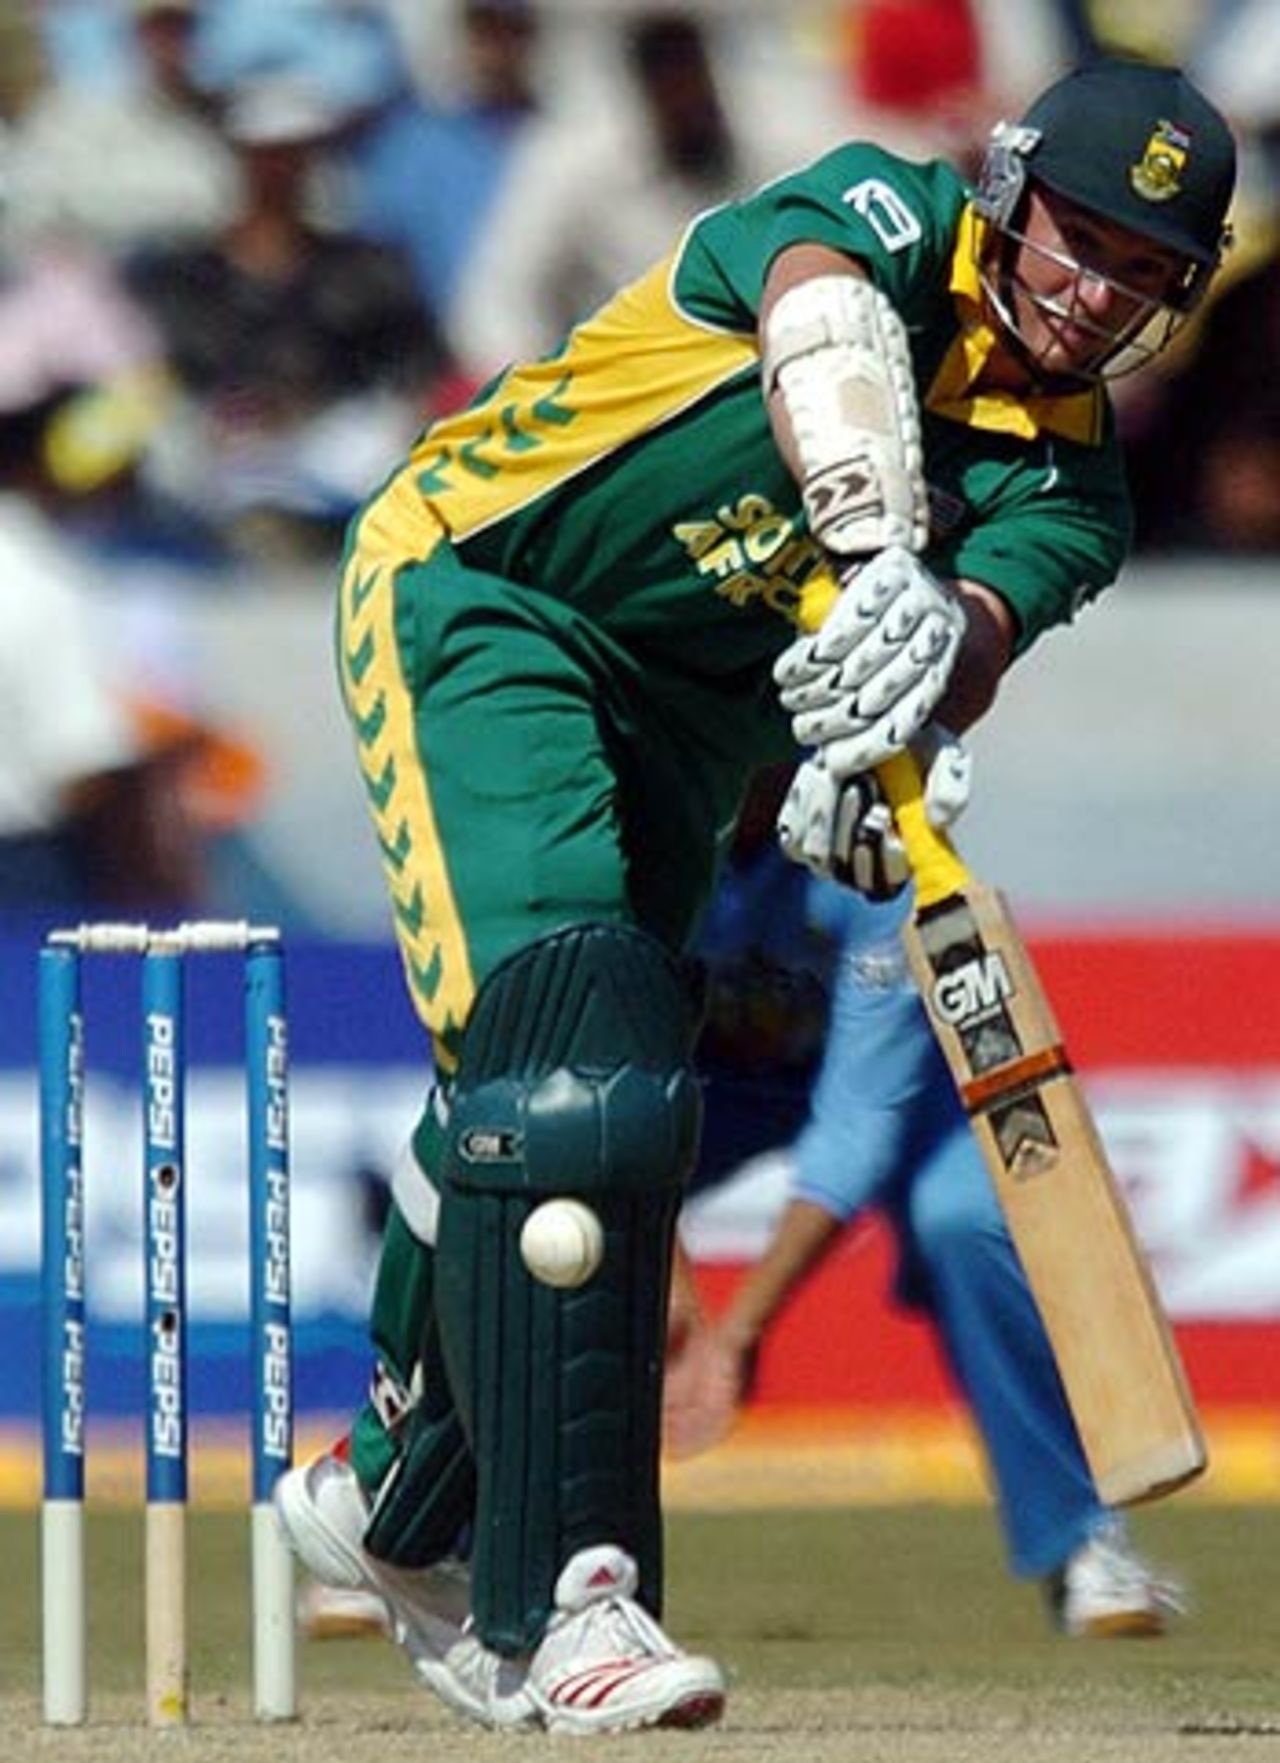 Graeme Smith smashed 48 from 36 balls despite the loss of two early wickets, India v South Africa, 1st ODI, Hyderabad, November 16, 2005